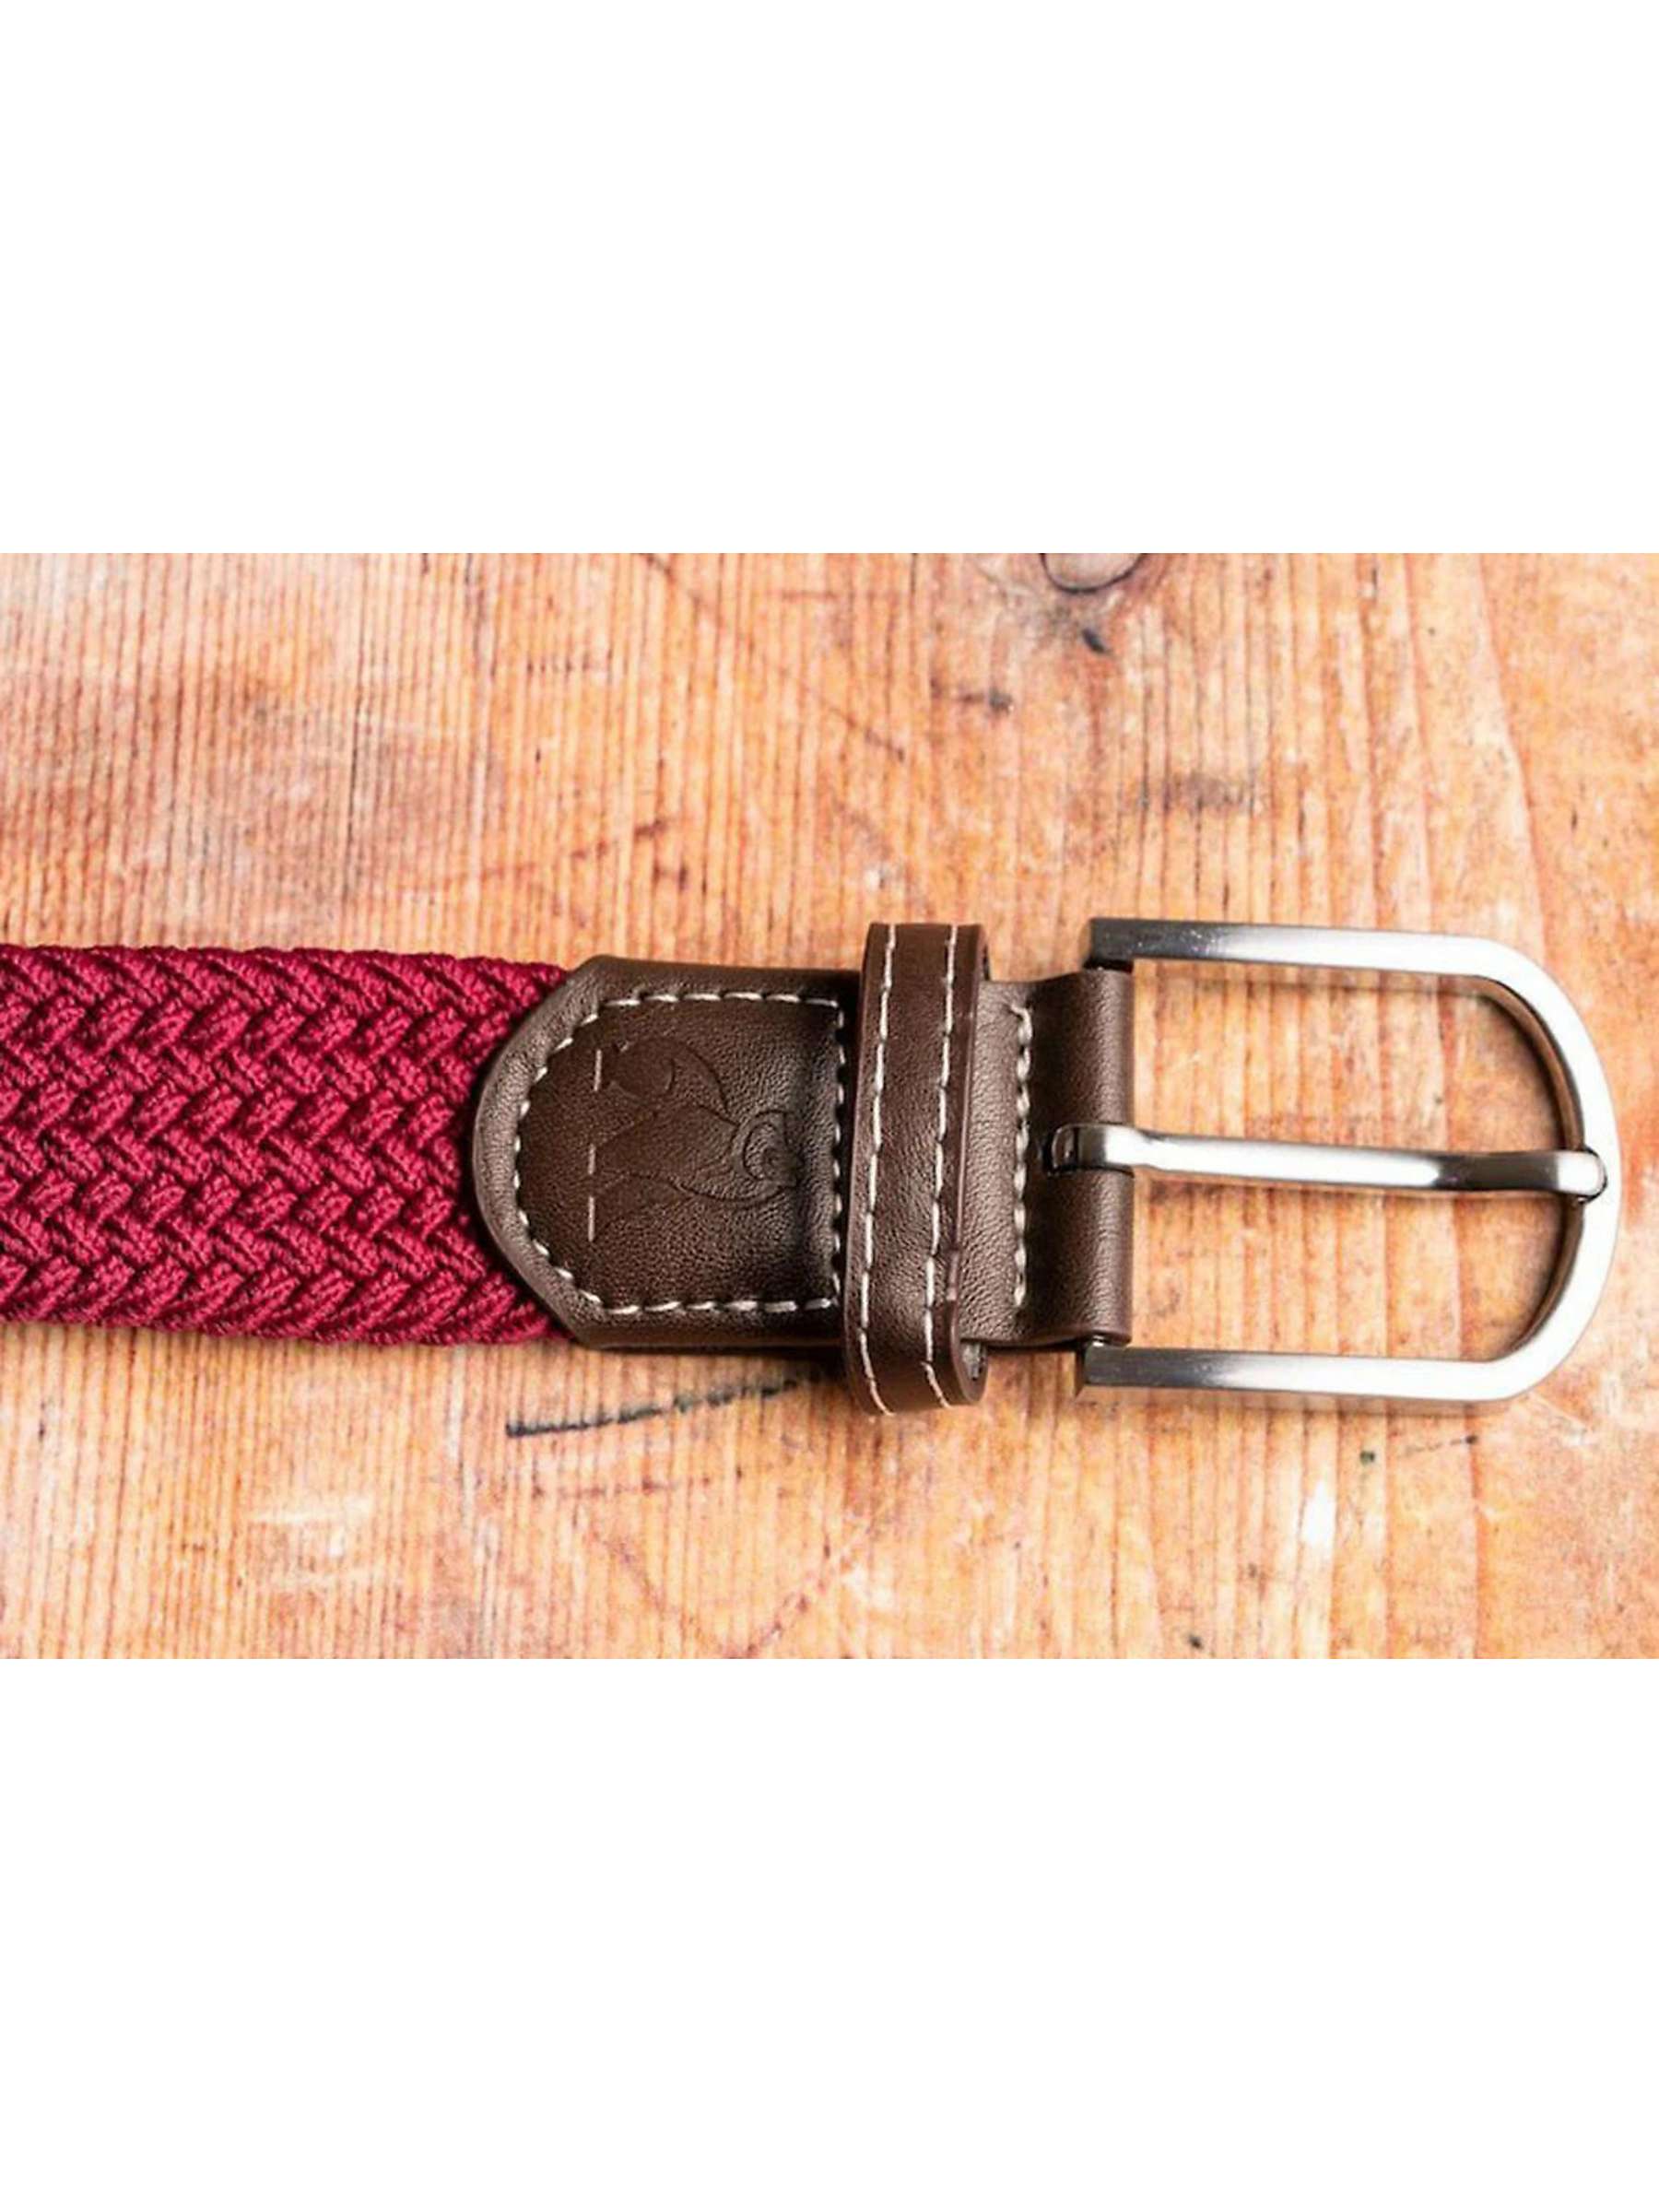 Buy Swole Panda Recycled Woven Belt Online at johnlewis.com